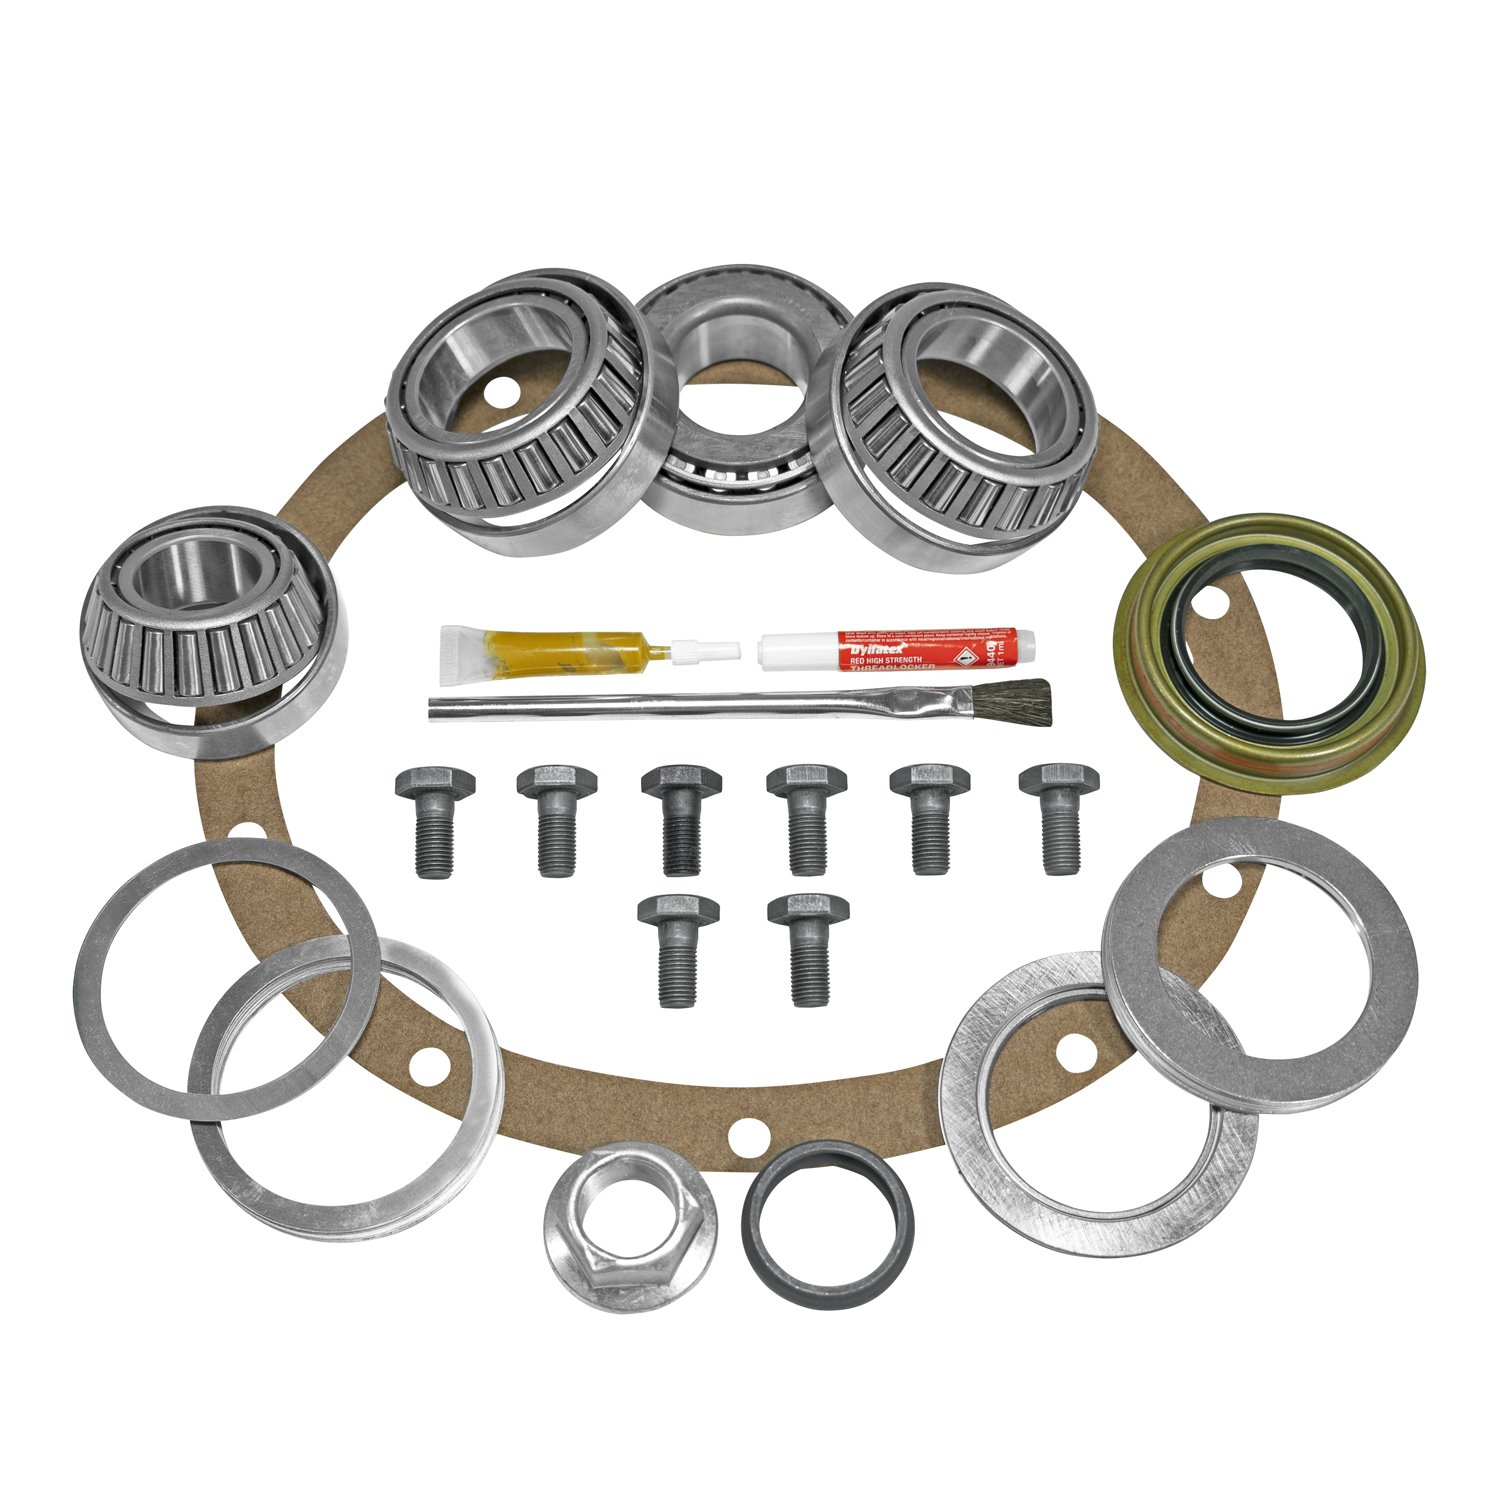 USA Standard ZK M35-GRAND Master Overhaul Kit, For The '99 And Newer Wj Model 35 Differential